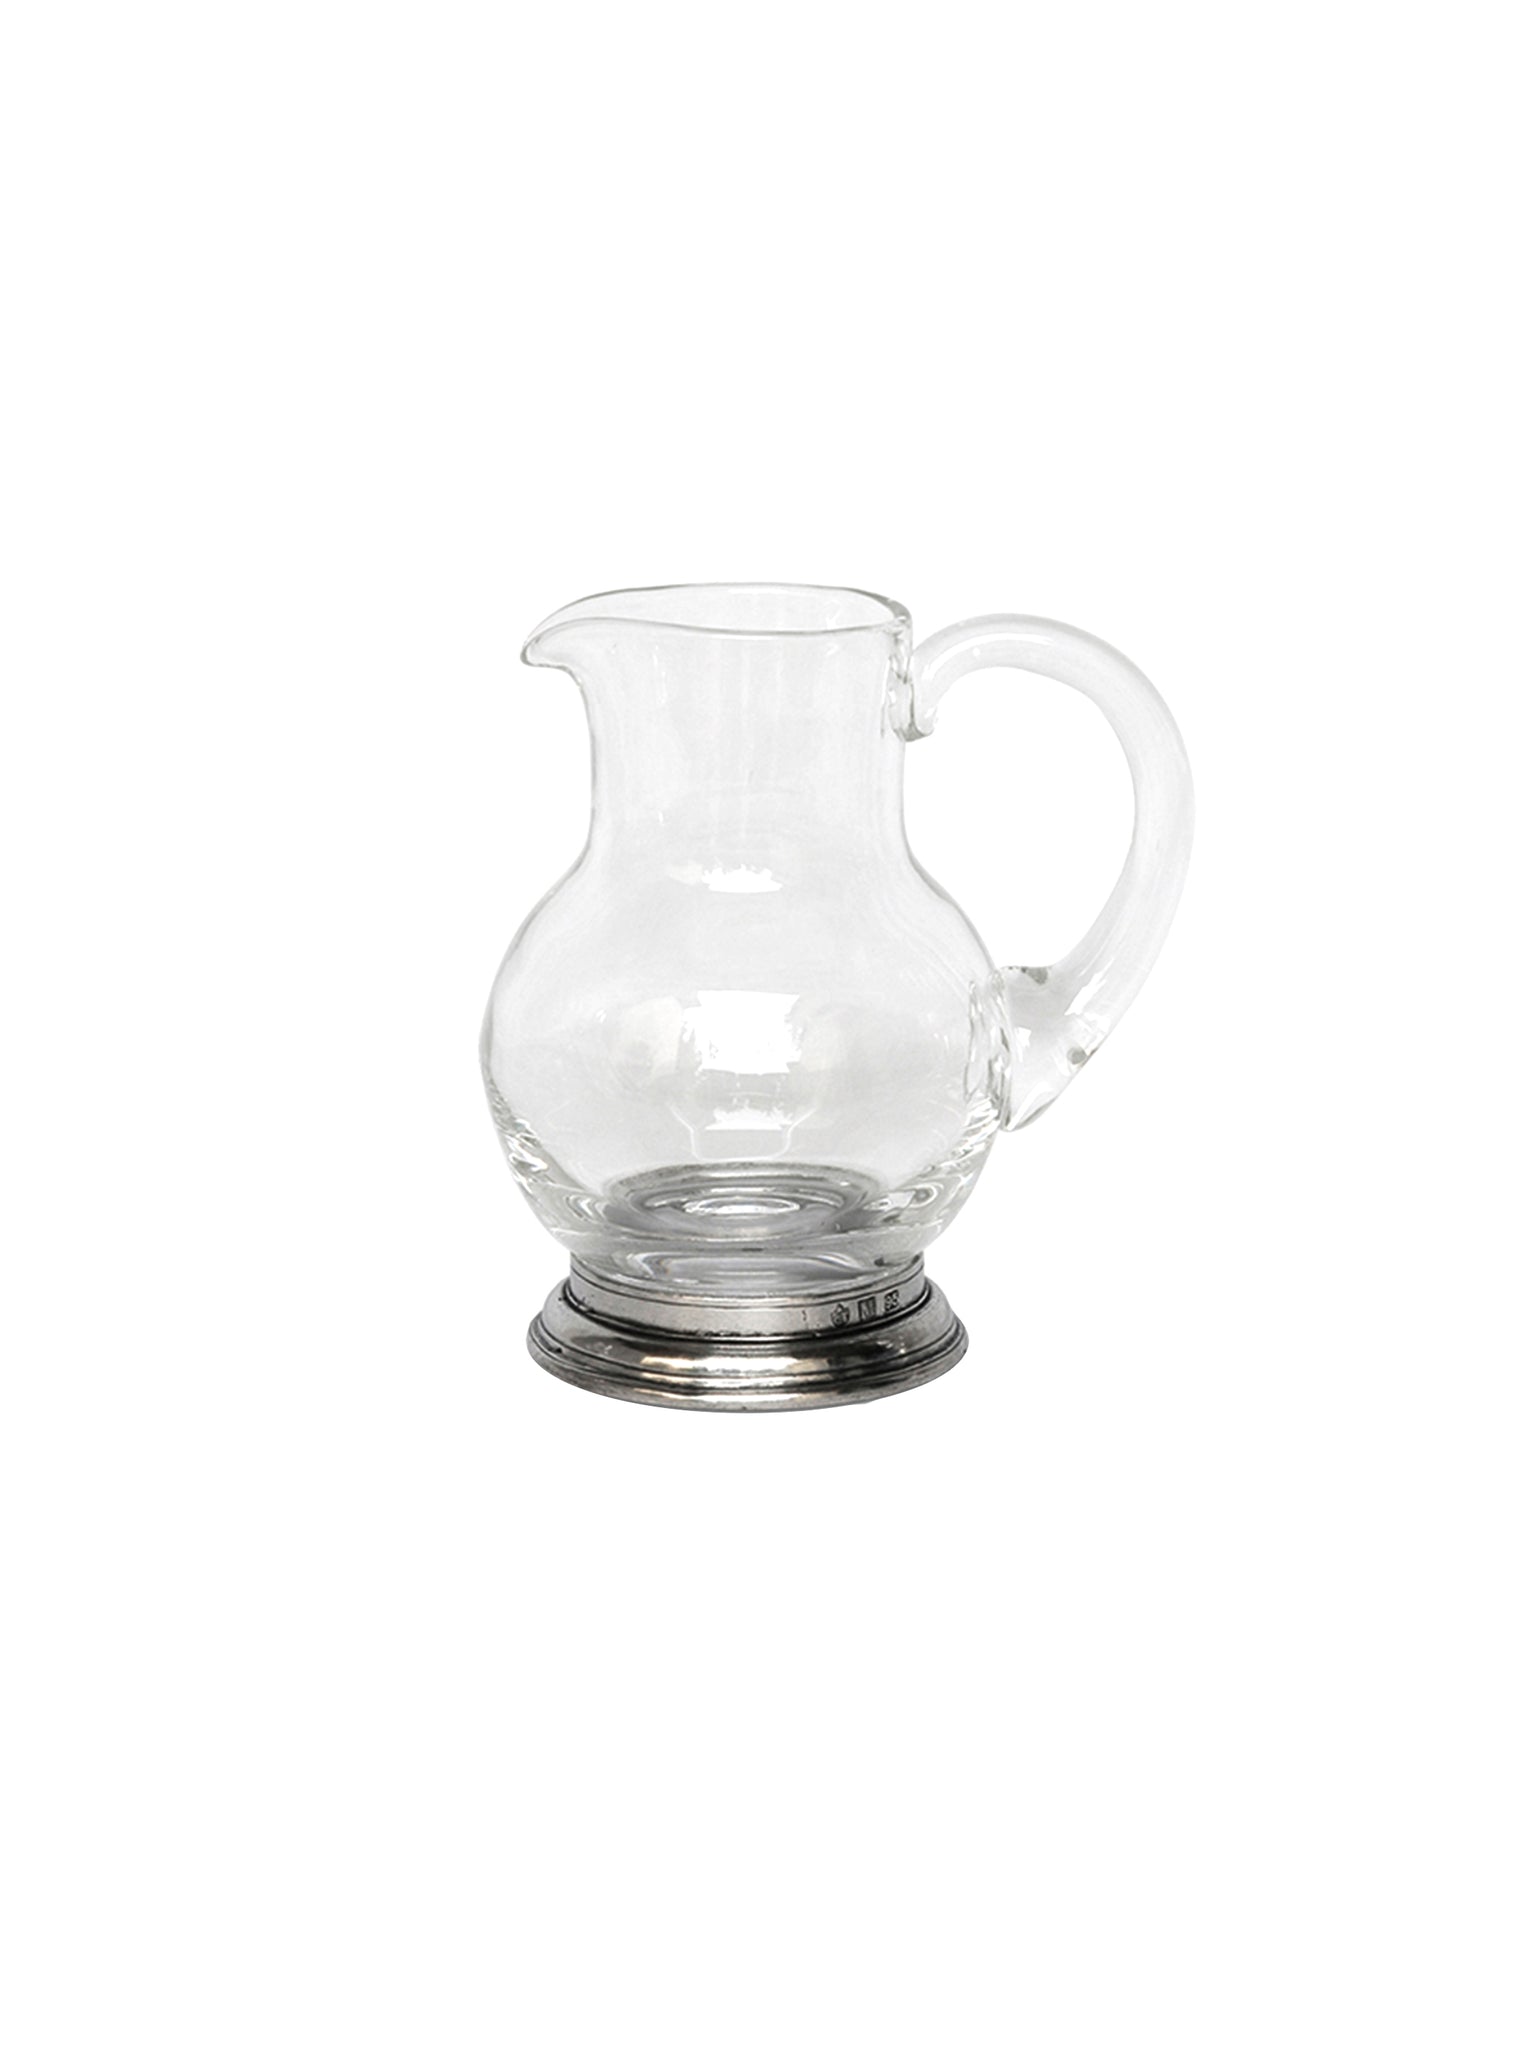 MATCH Pewter Glass Pitcher Small Weston Table